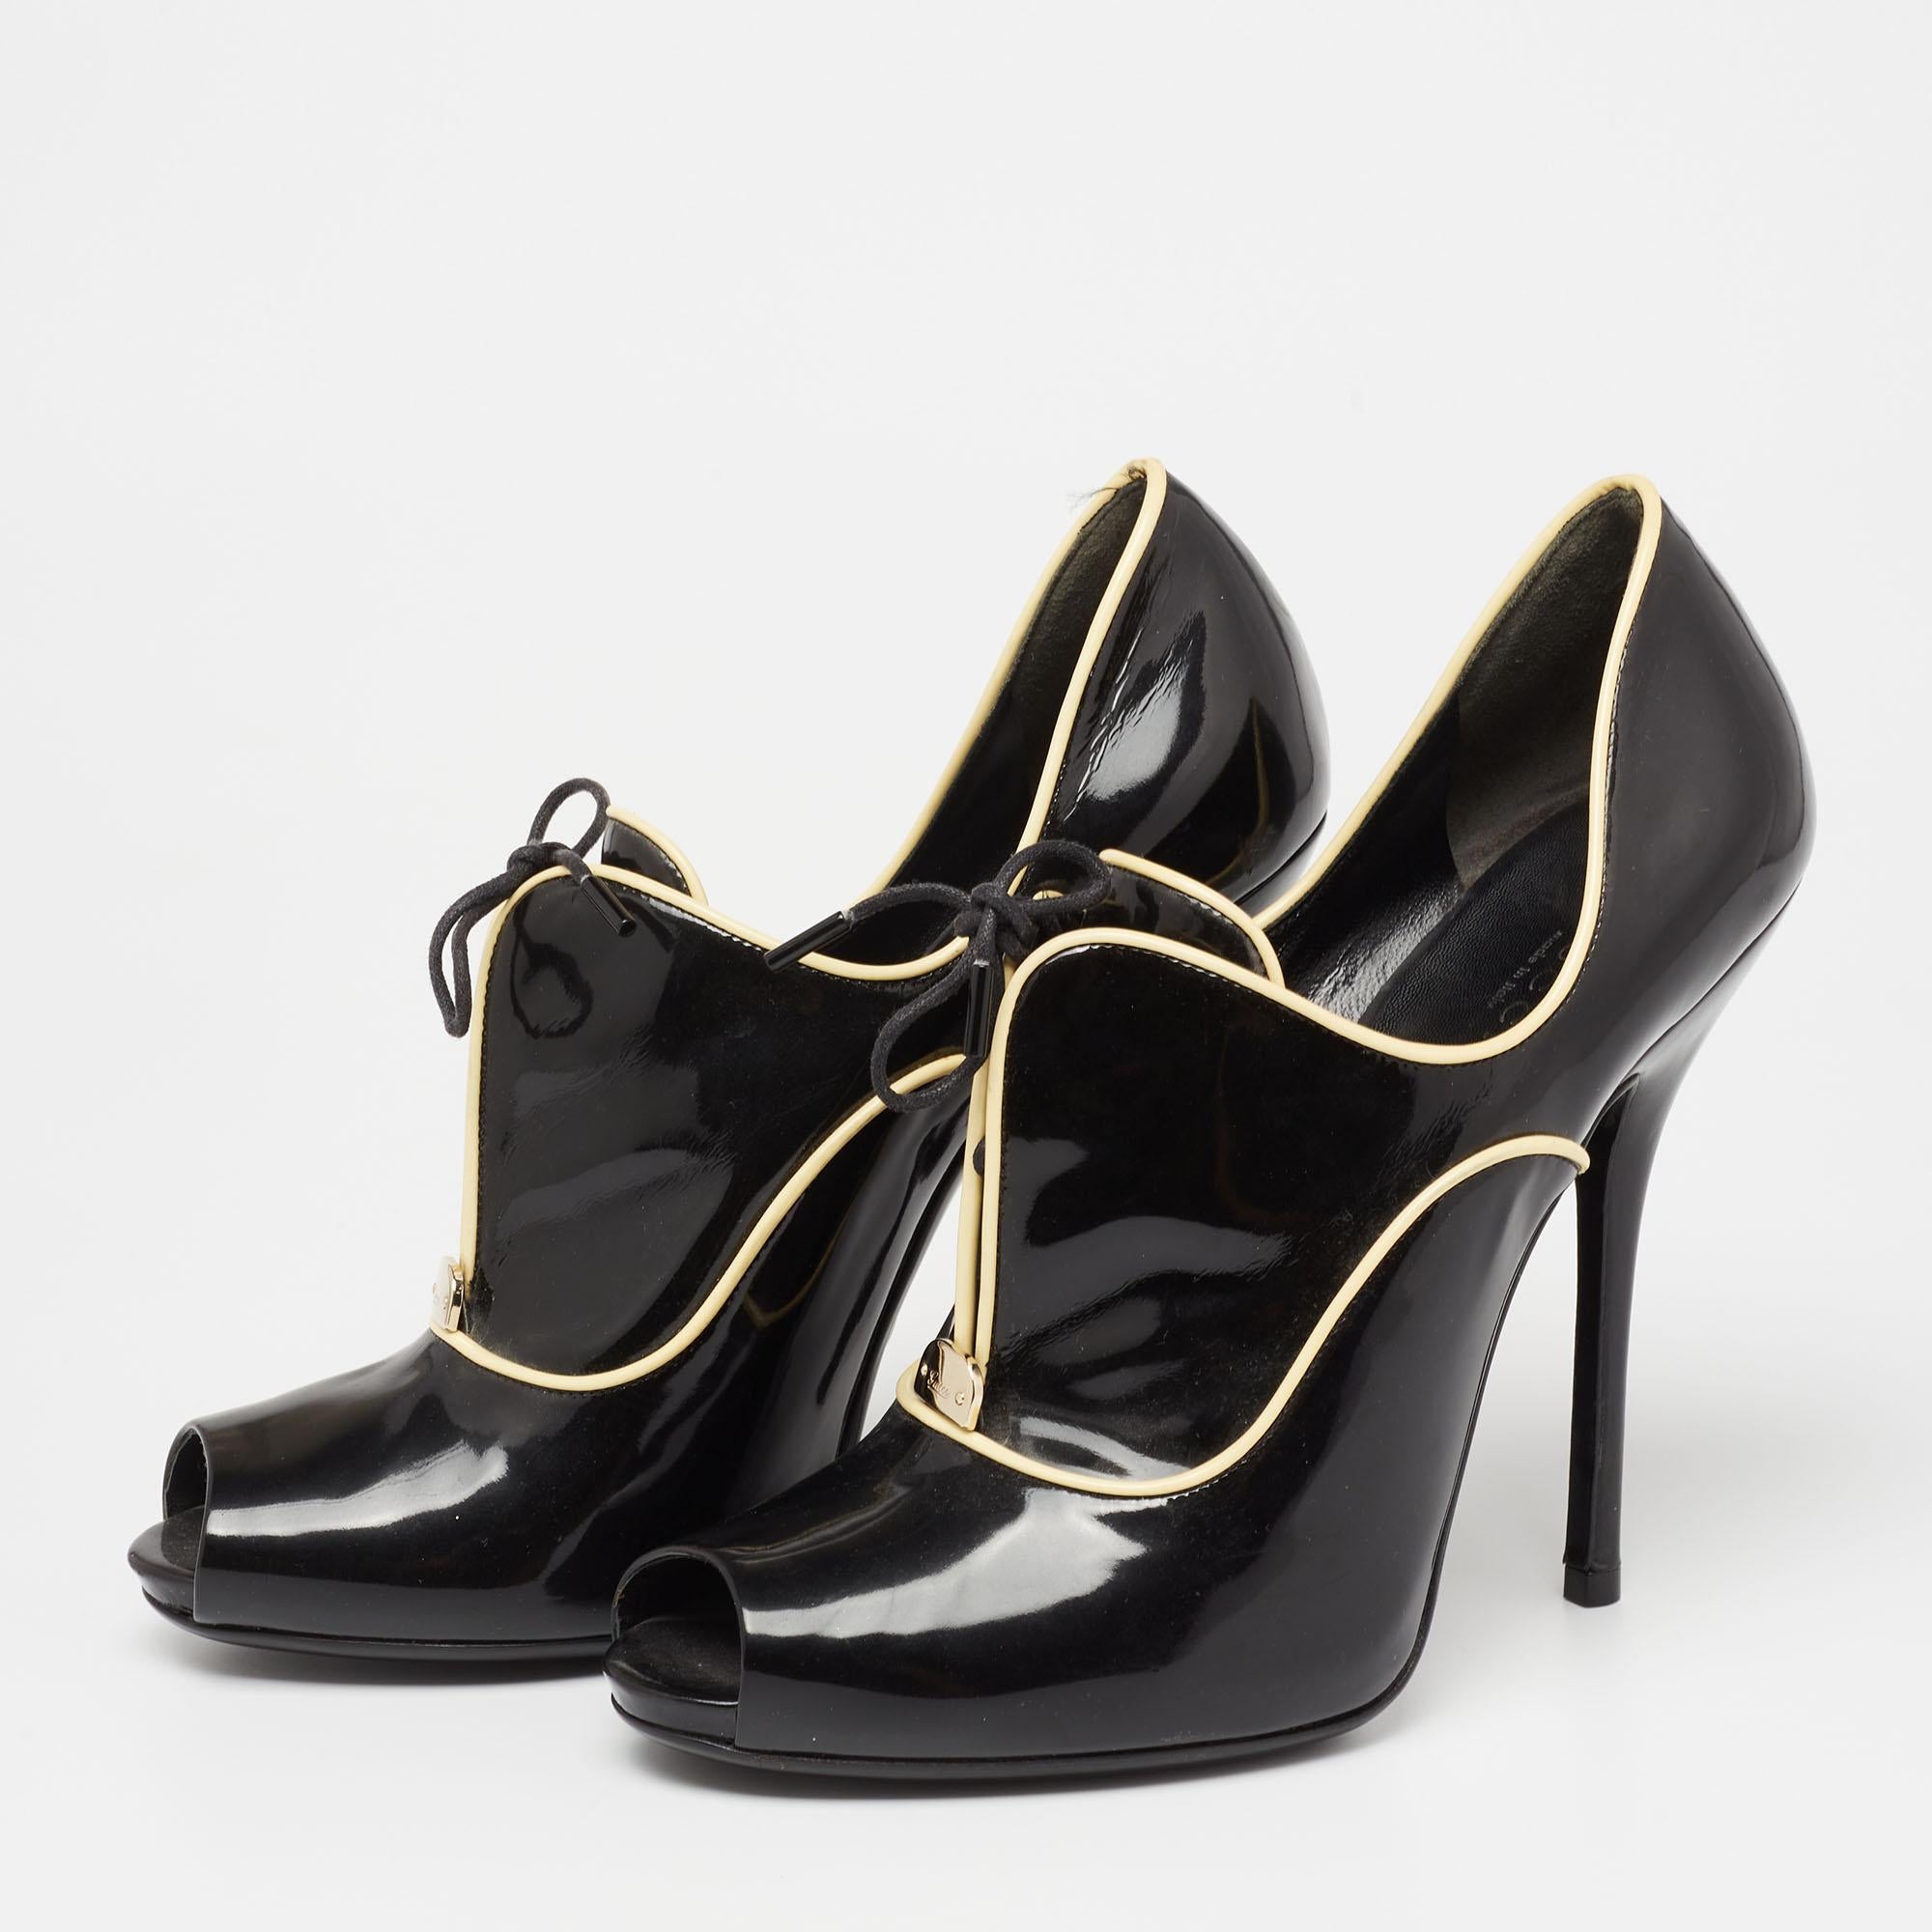 Made in Italy, this pair of Gucci ankle booties is beautifully designed with black patent leather and contrasting trims. The shoes have peep toes, lace-up details, and 13 cm heels giving the design a grand finish.